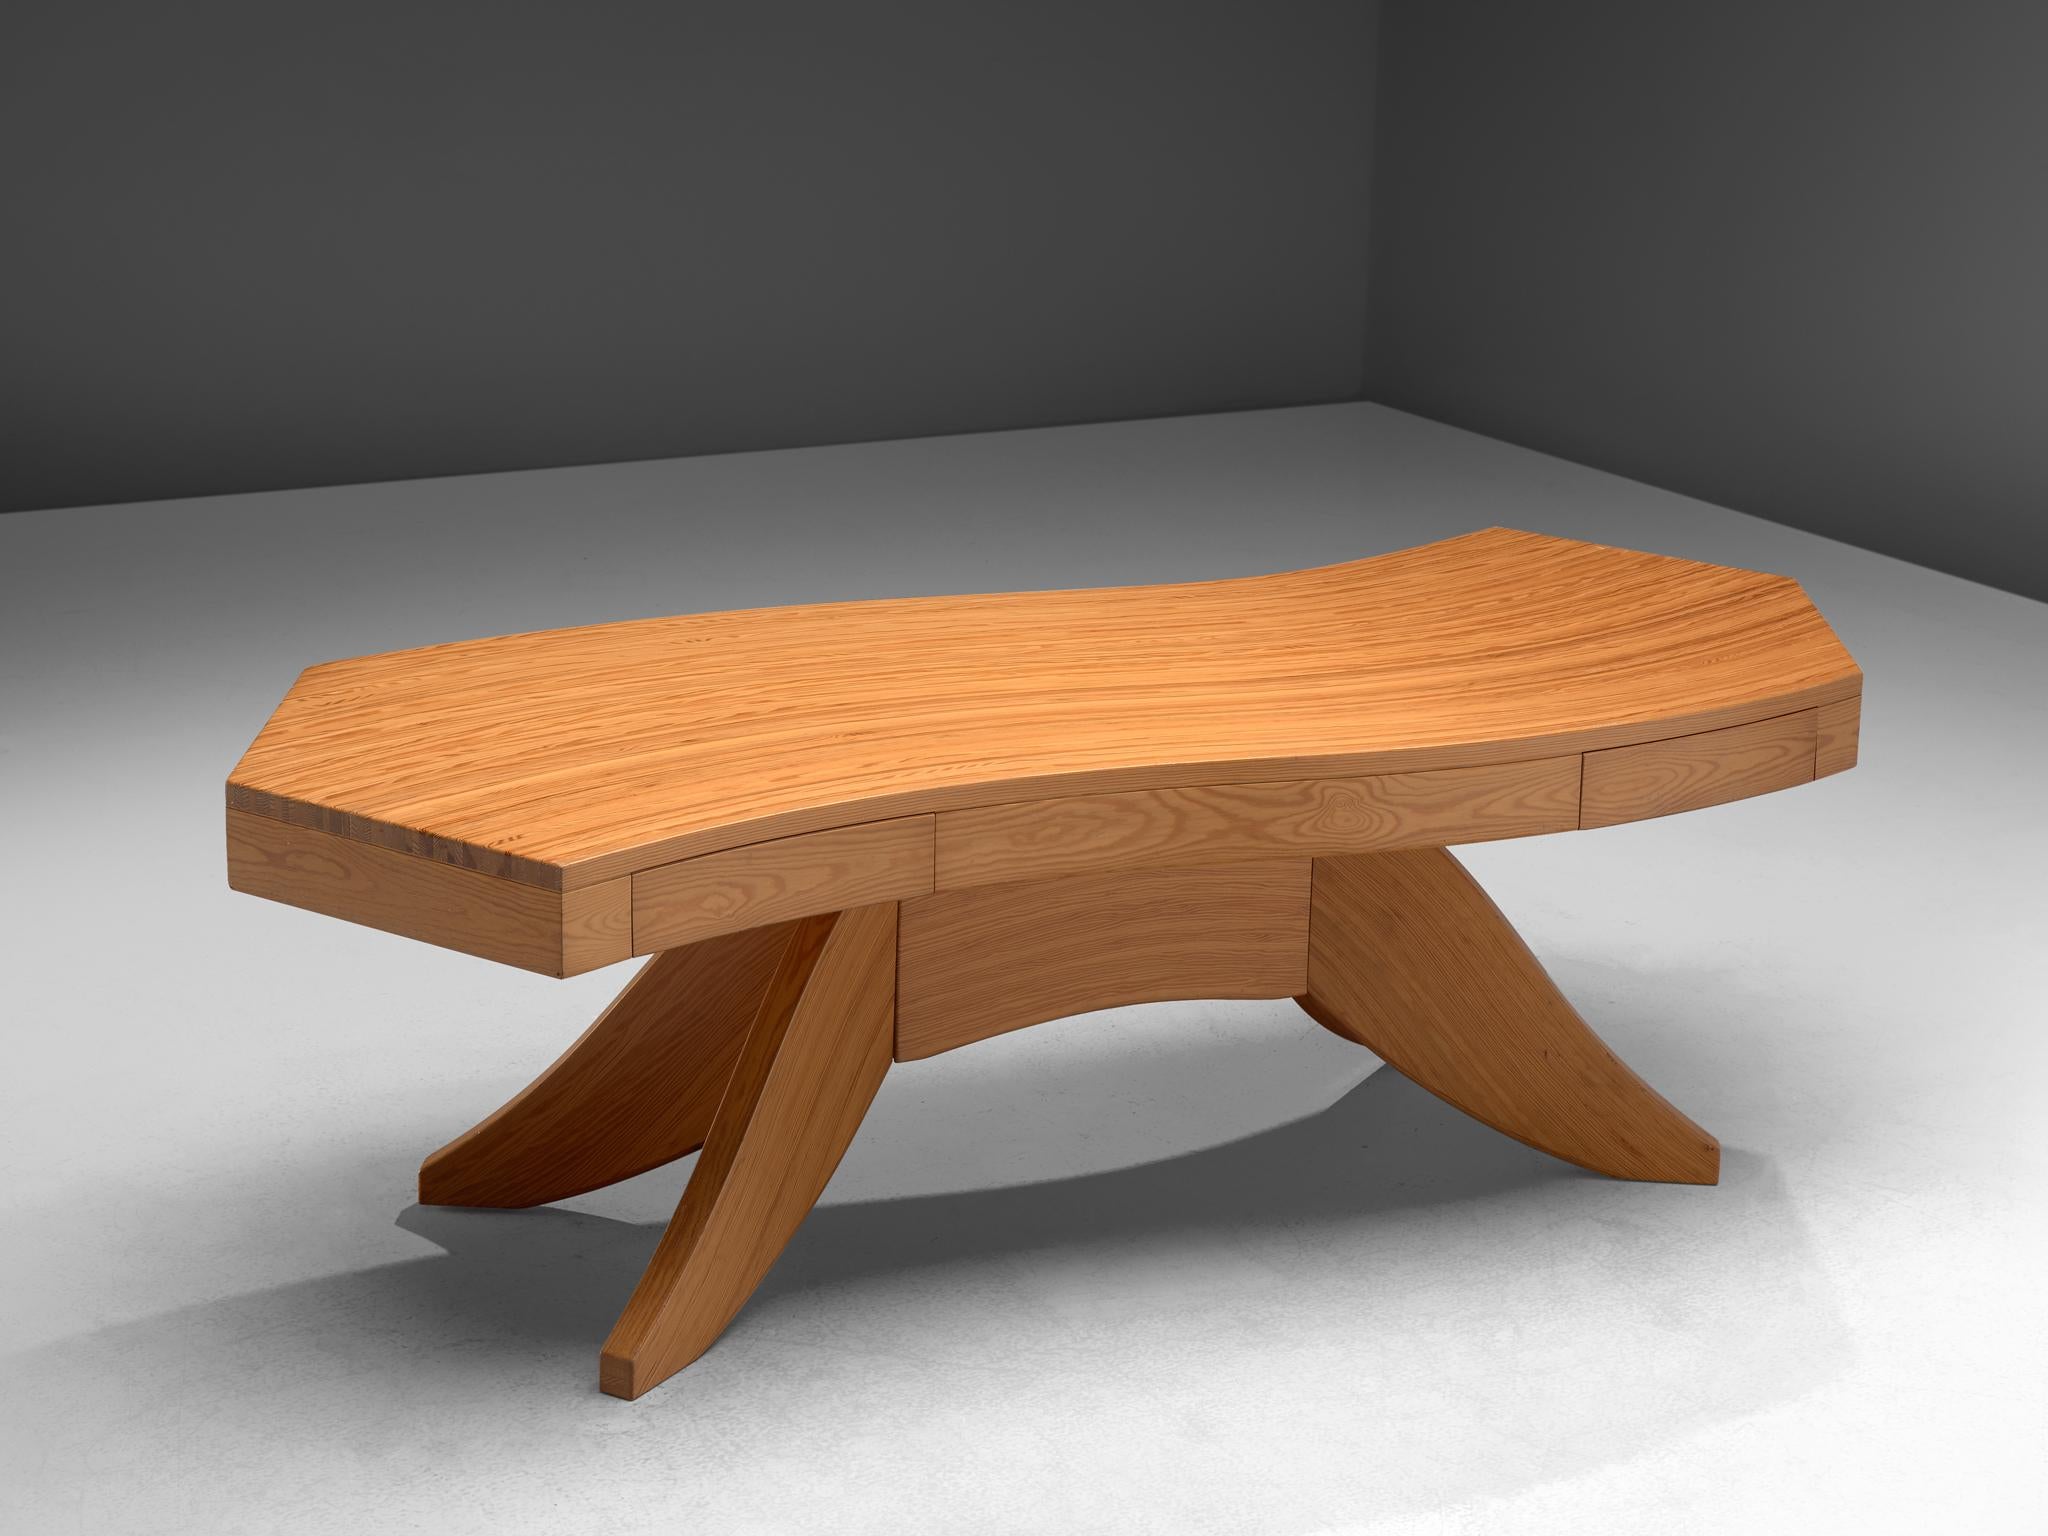 Writing table, pine, Scandinavia, 1960s.

Stunning biomorphic table with a waved table top. This writing table features a waved wooden top, made out of tangentially-sawn pine slats. Two drawers are included in the table top. The centered leg